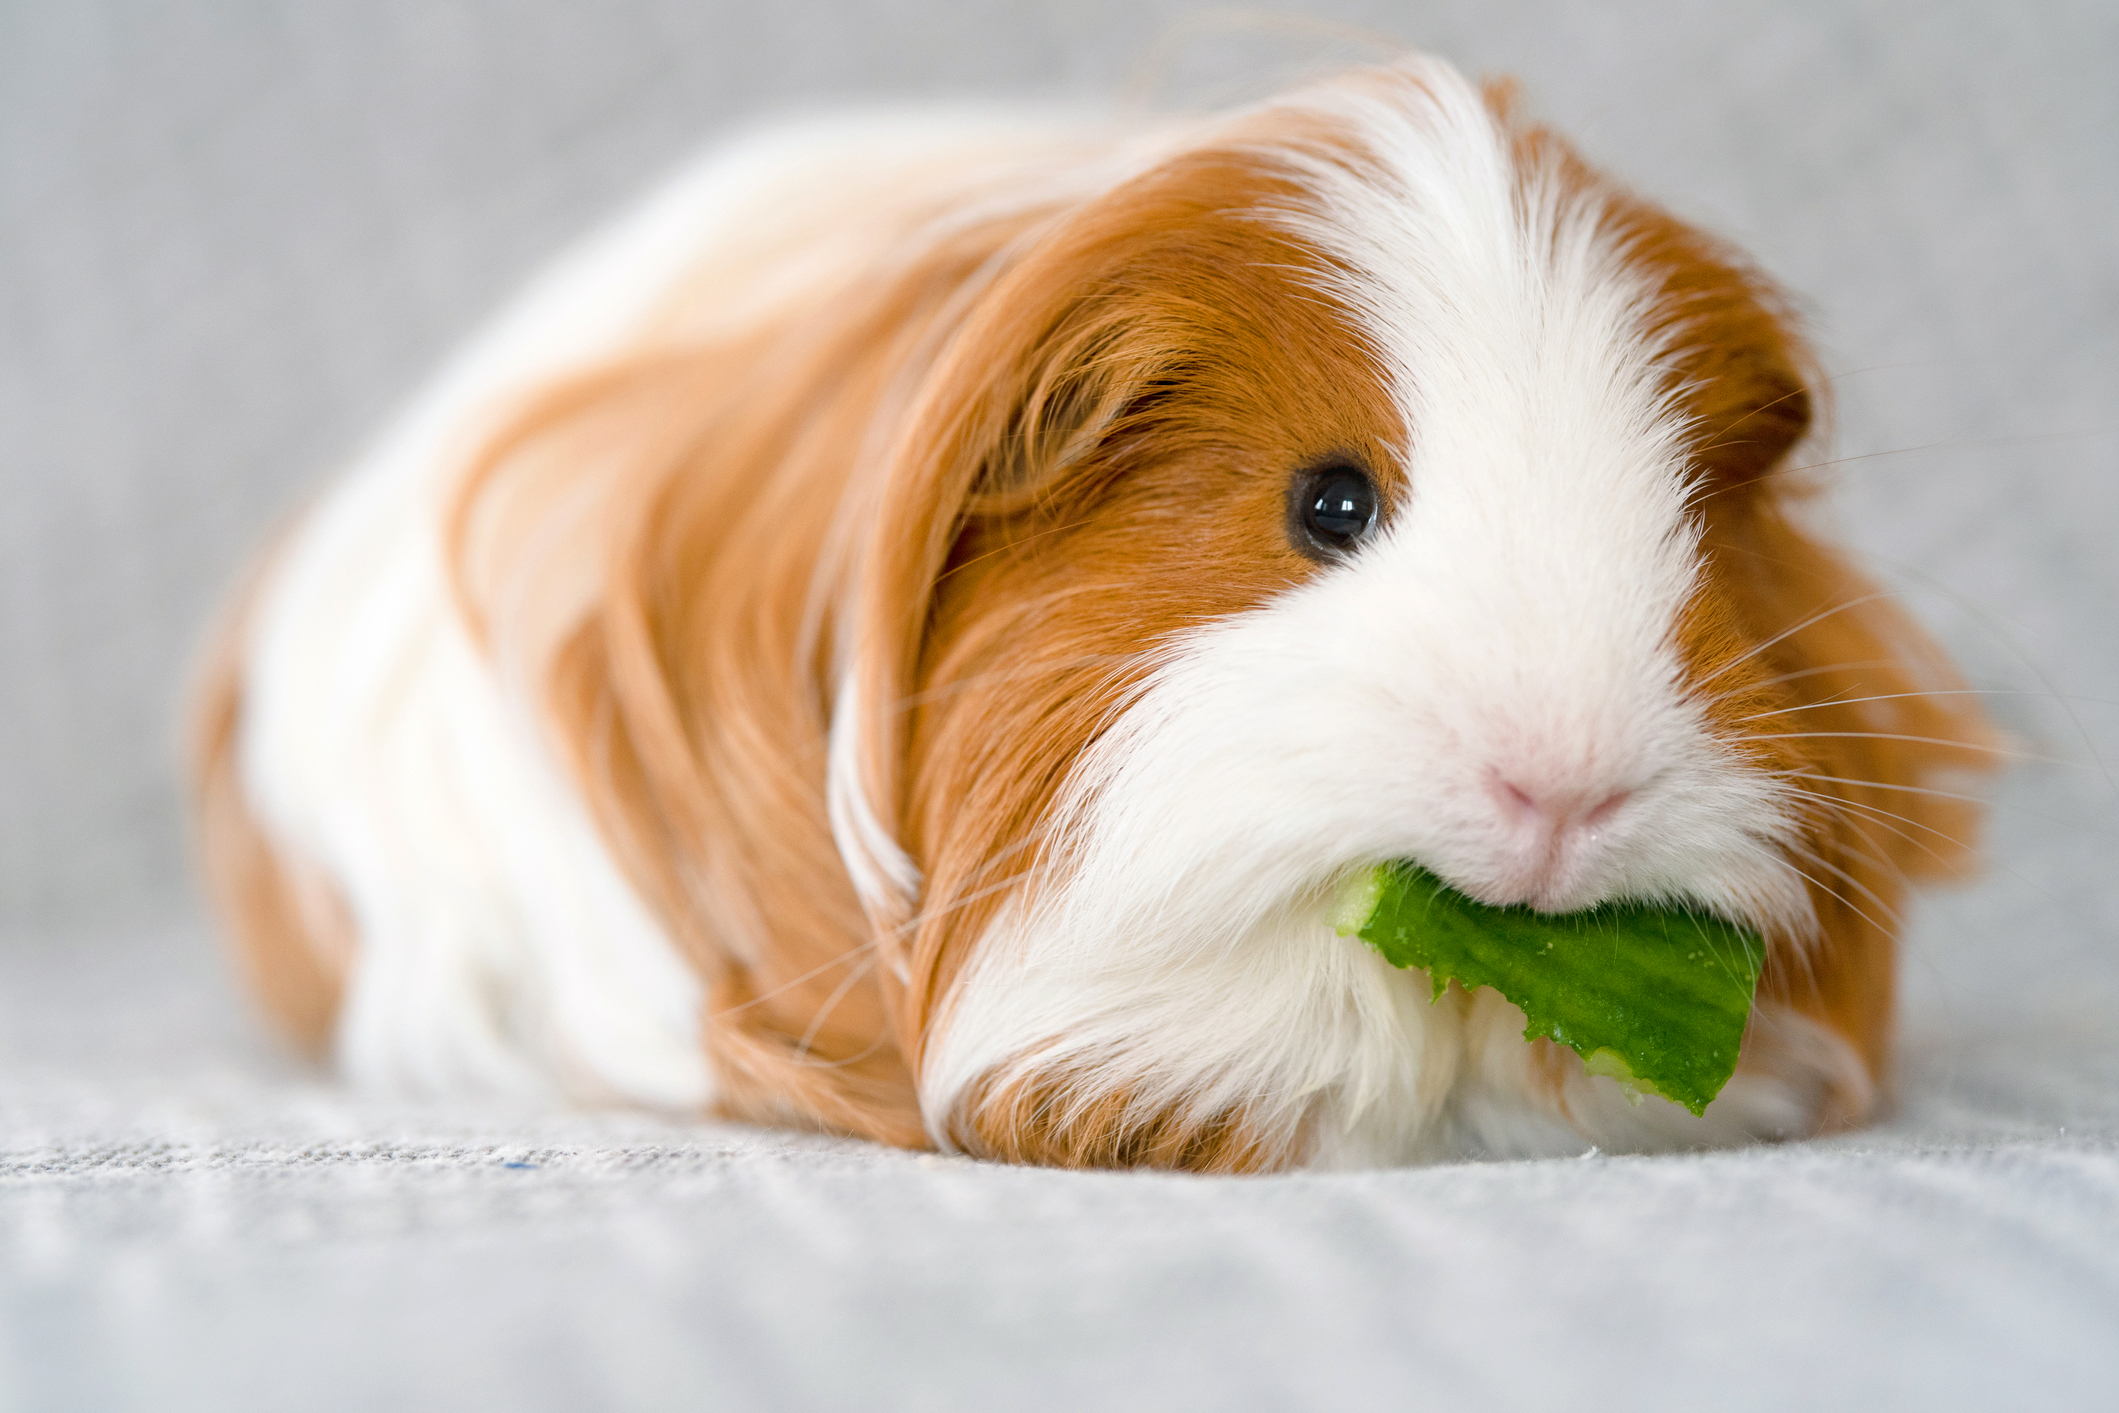 What kind of human food can I feed my guinea pig?